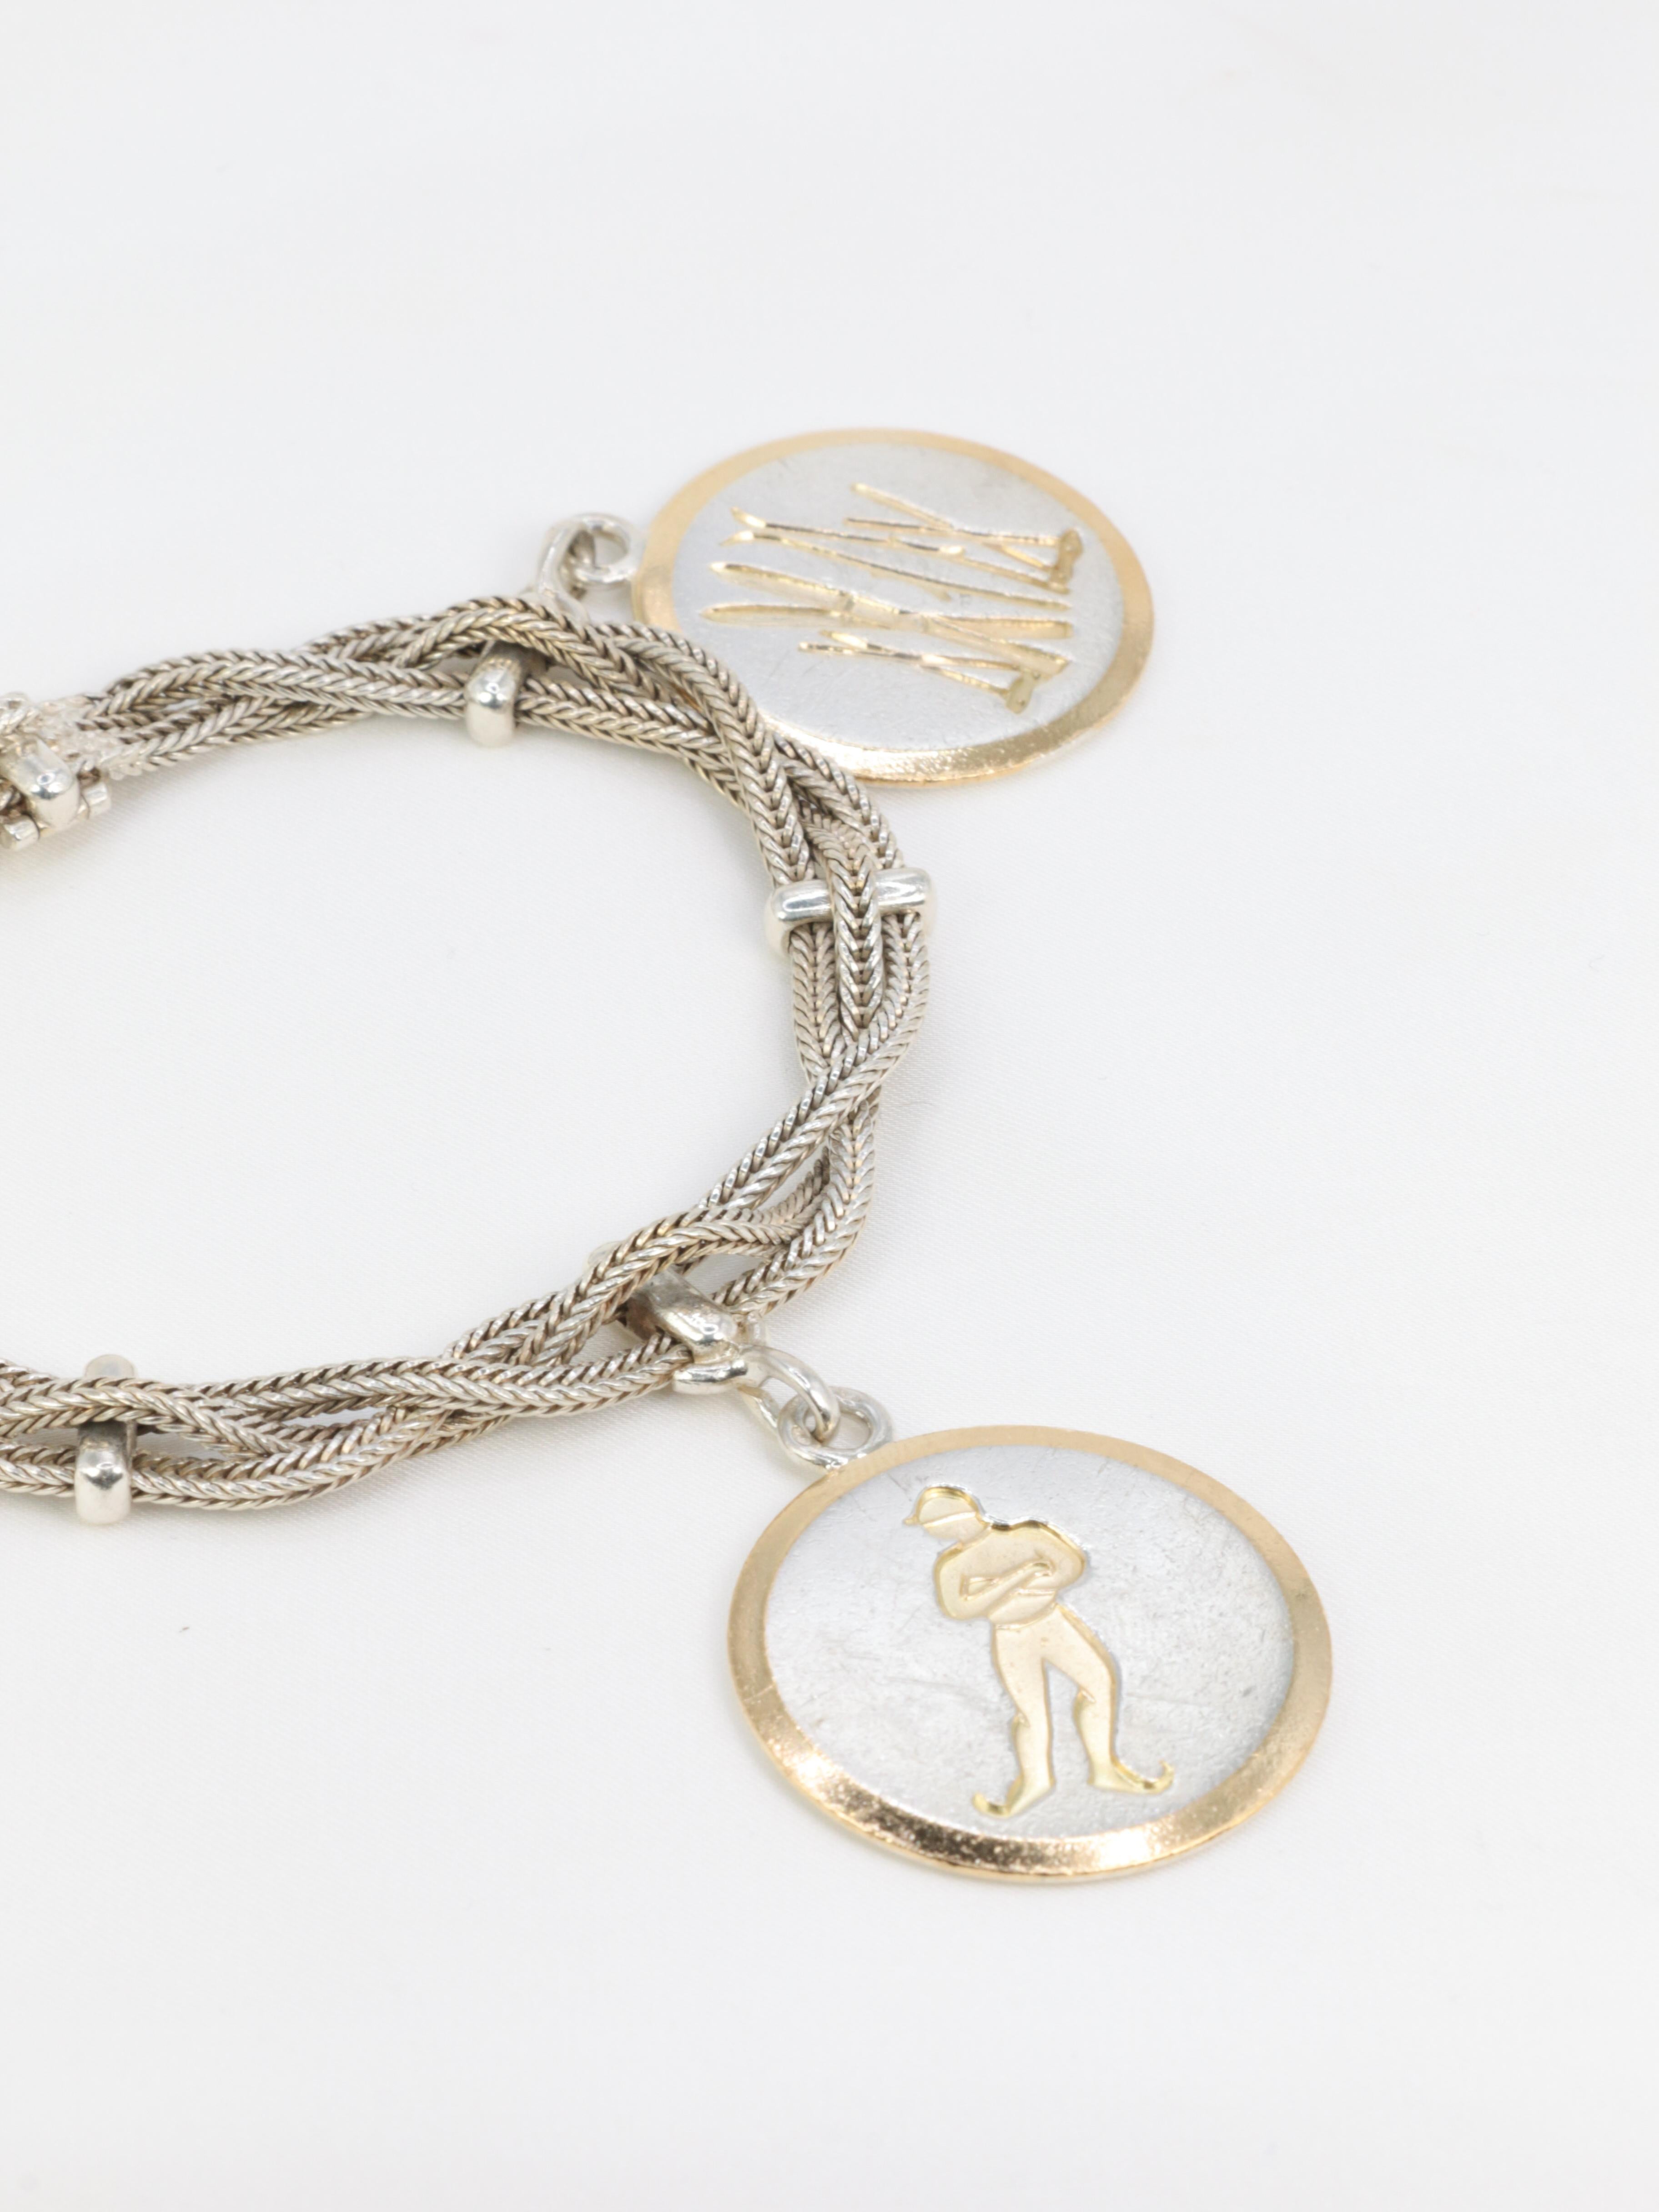 Partially vermeiled silver bracelet featuring three braided chains enhanced by three ski-themed medals. The first features two pairs of skis, the second a skater and the last a ski slope.
French work from the 1950s.
Signed HERMES and trace of a